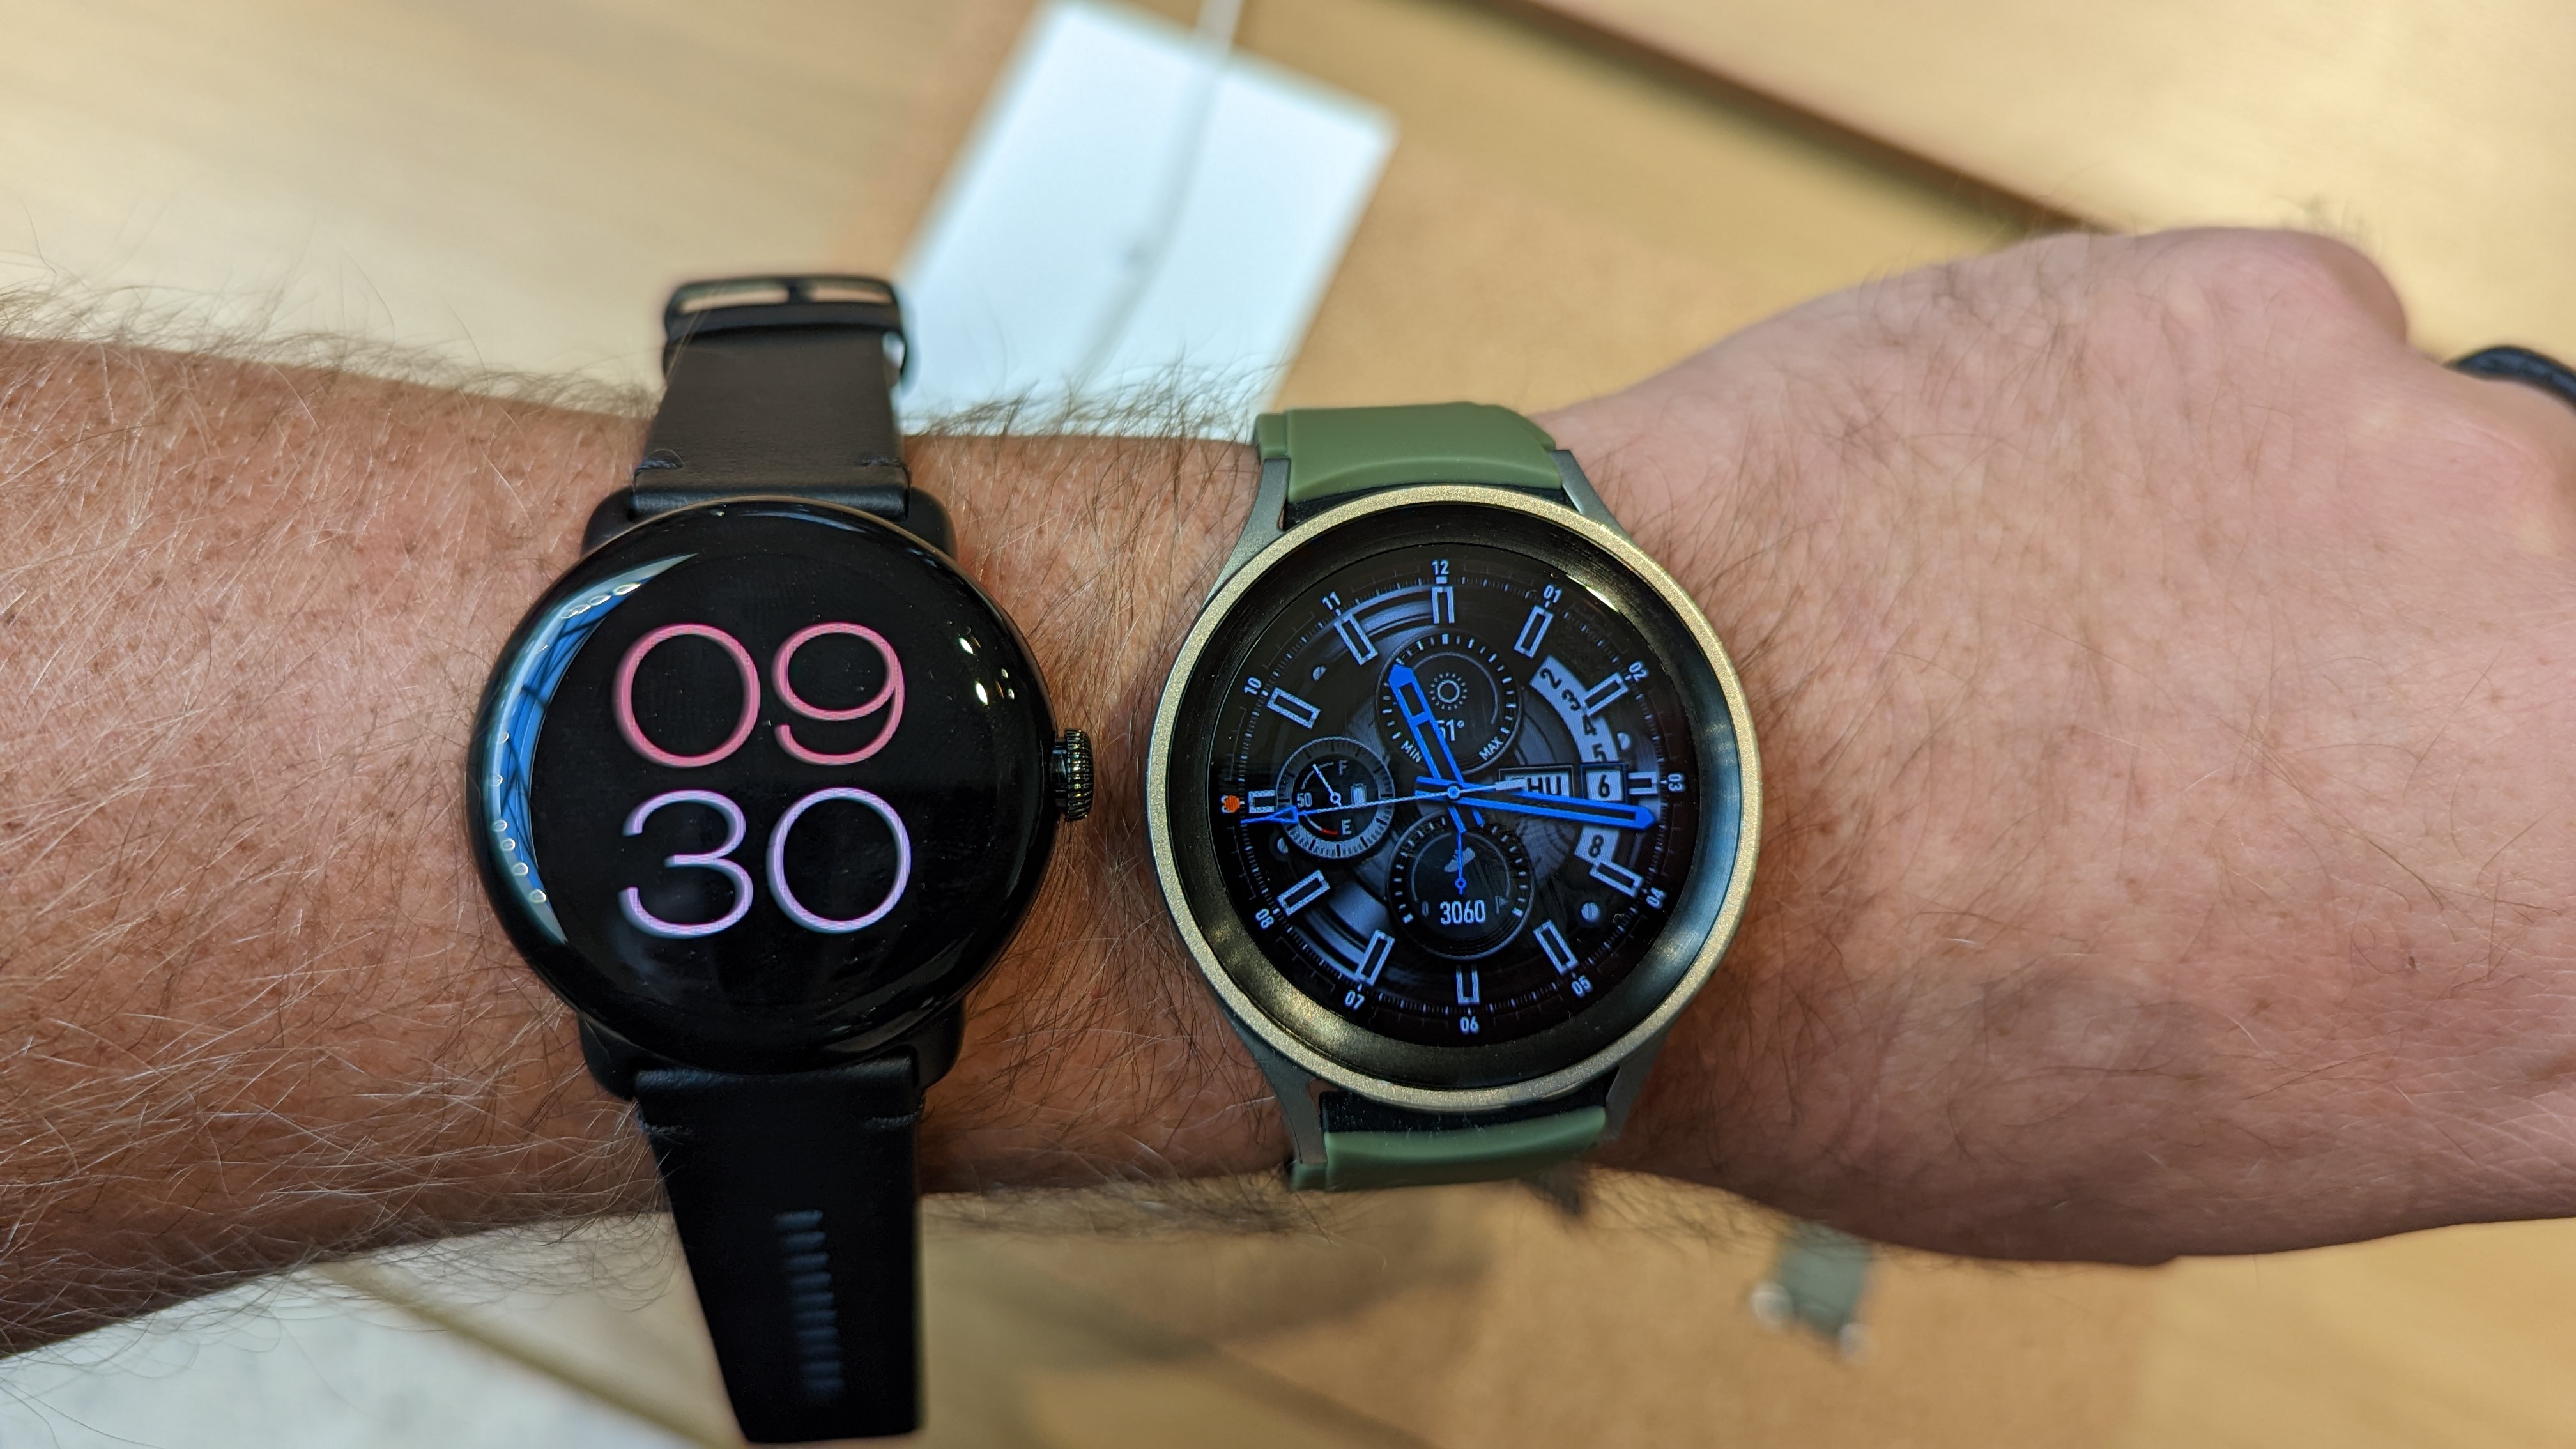 Google Pixel Watch compared with the Samsung Galaxy Watch 5 Pro at the hands-on